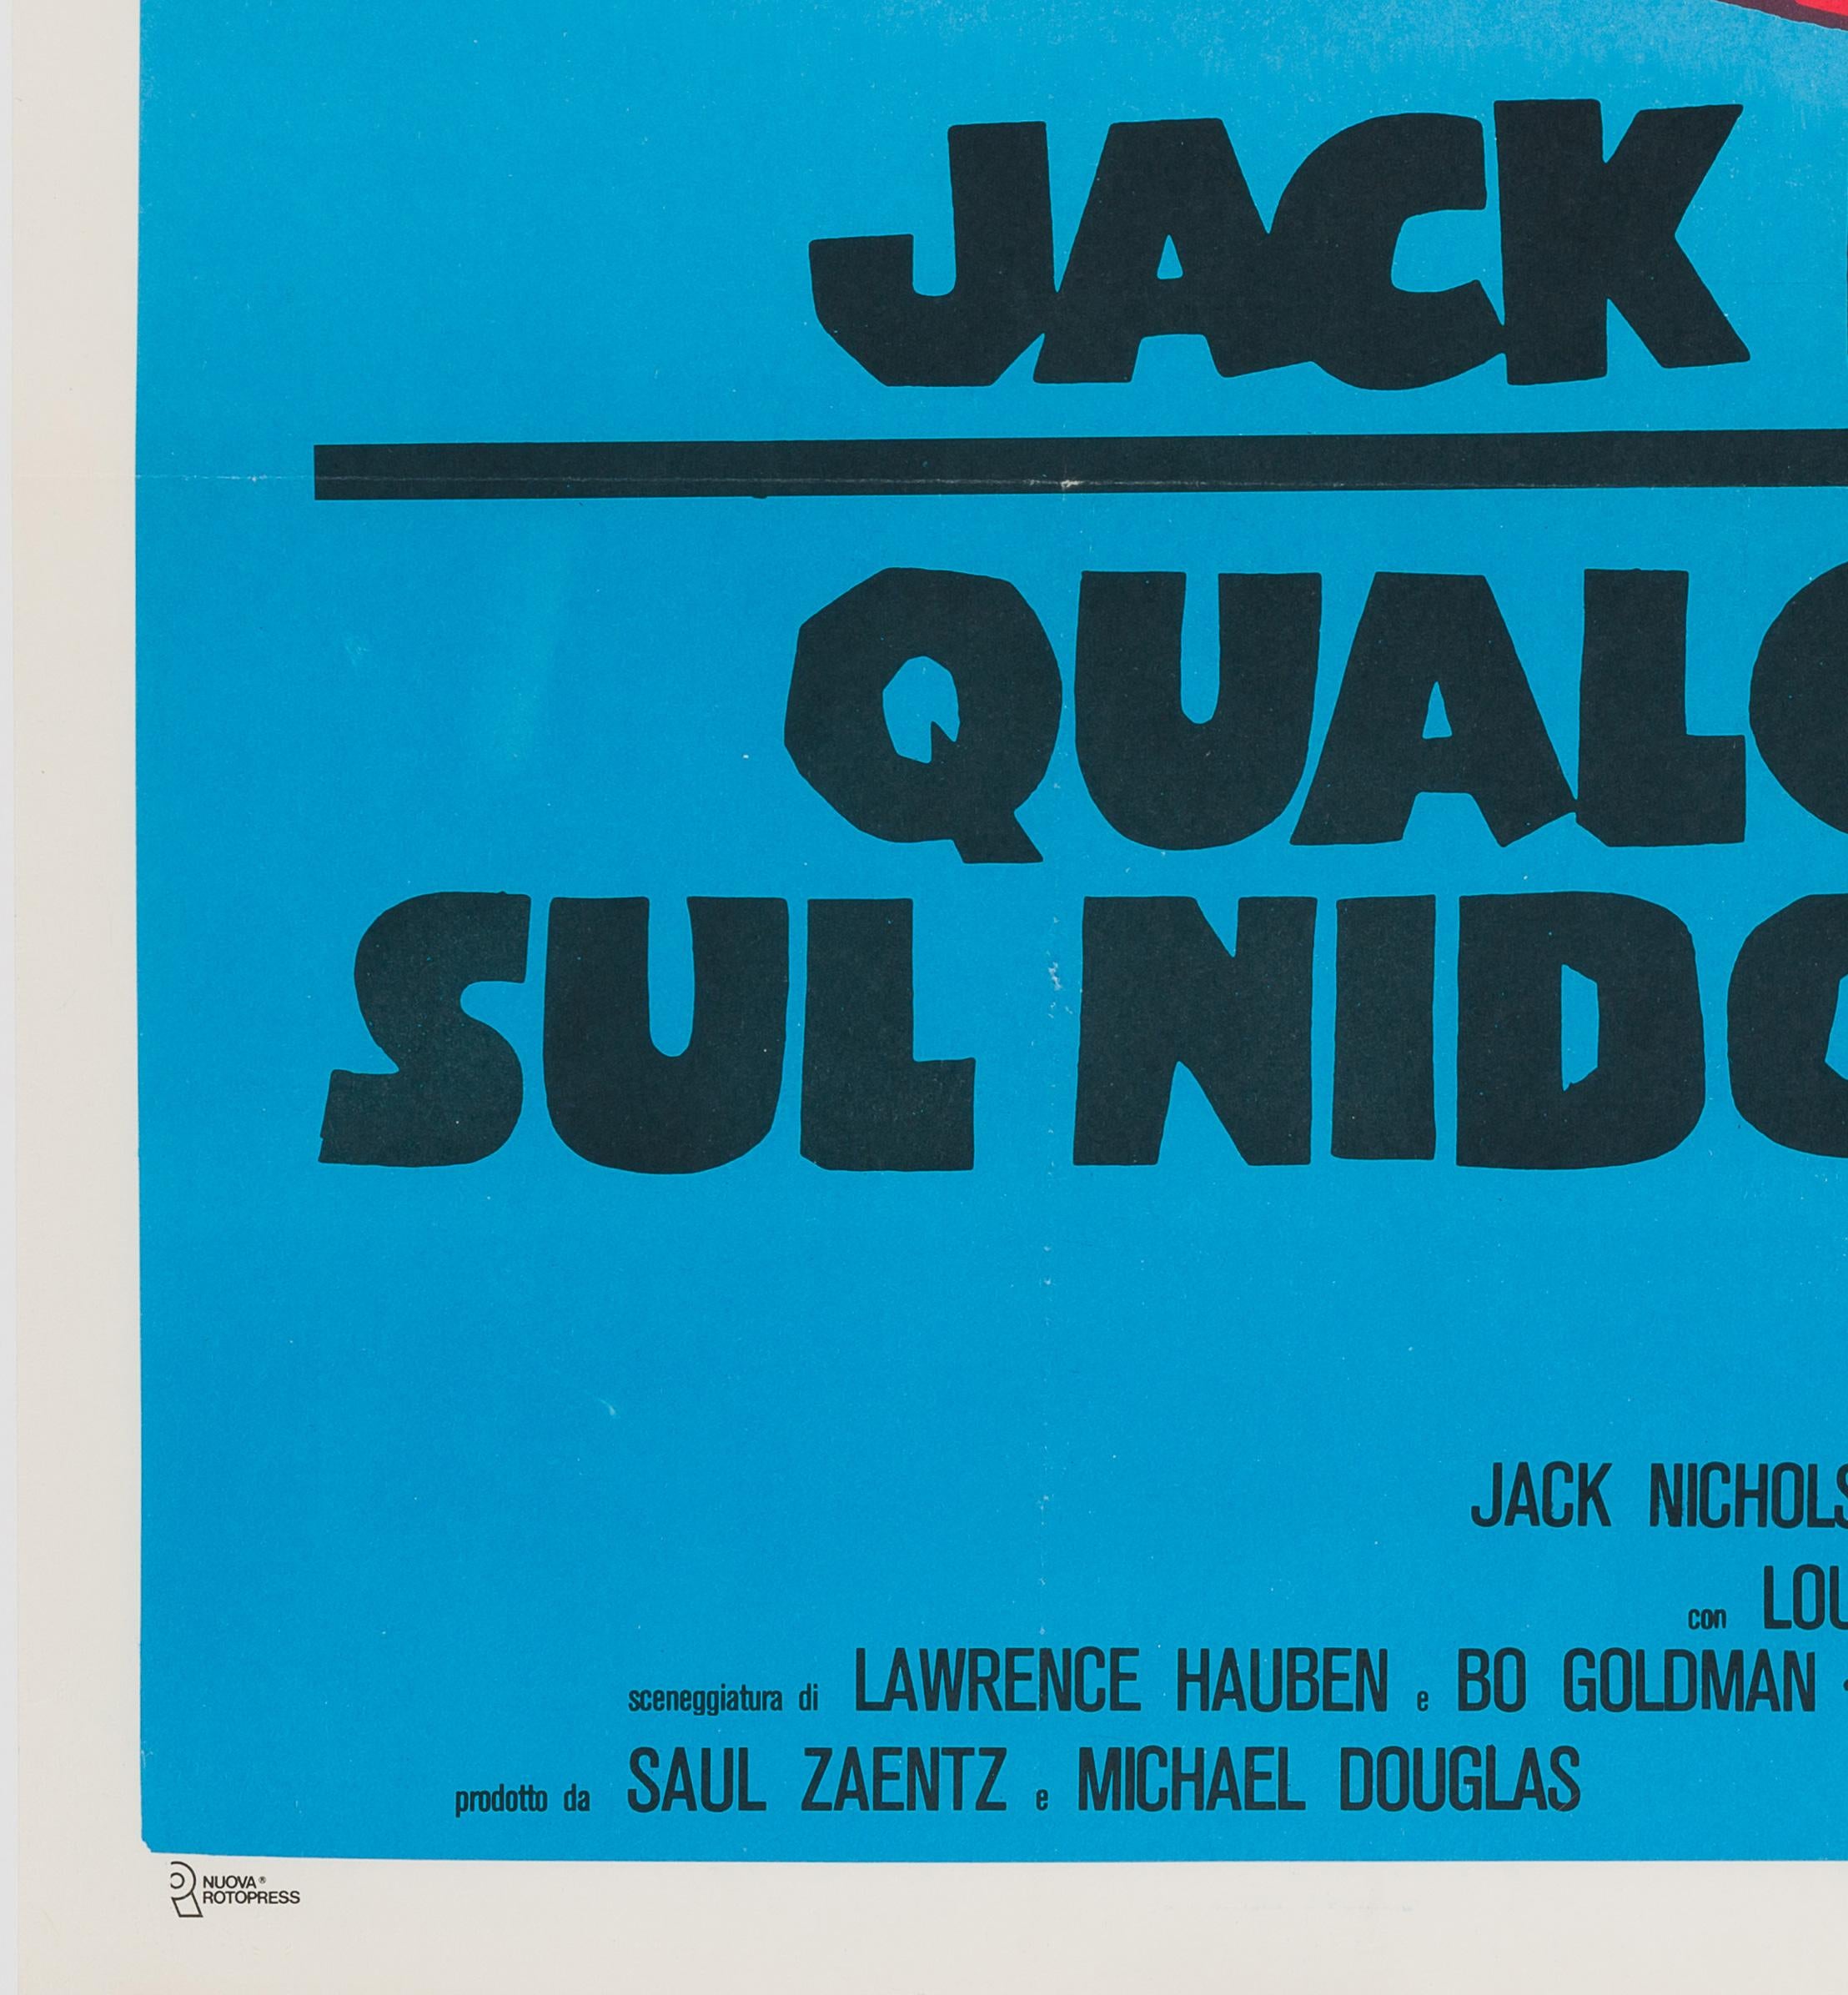 Jack Nicholson's character rightfully takes centre stage in the visually impressive vintage Italian 1970s re-release 2 sheet. The simple but effective artwork and size of the film poster combine to deliver a serious style statement. A rare movie